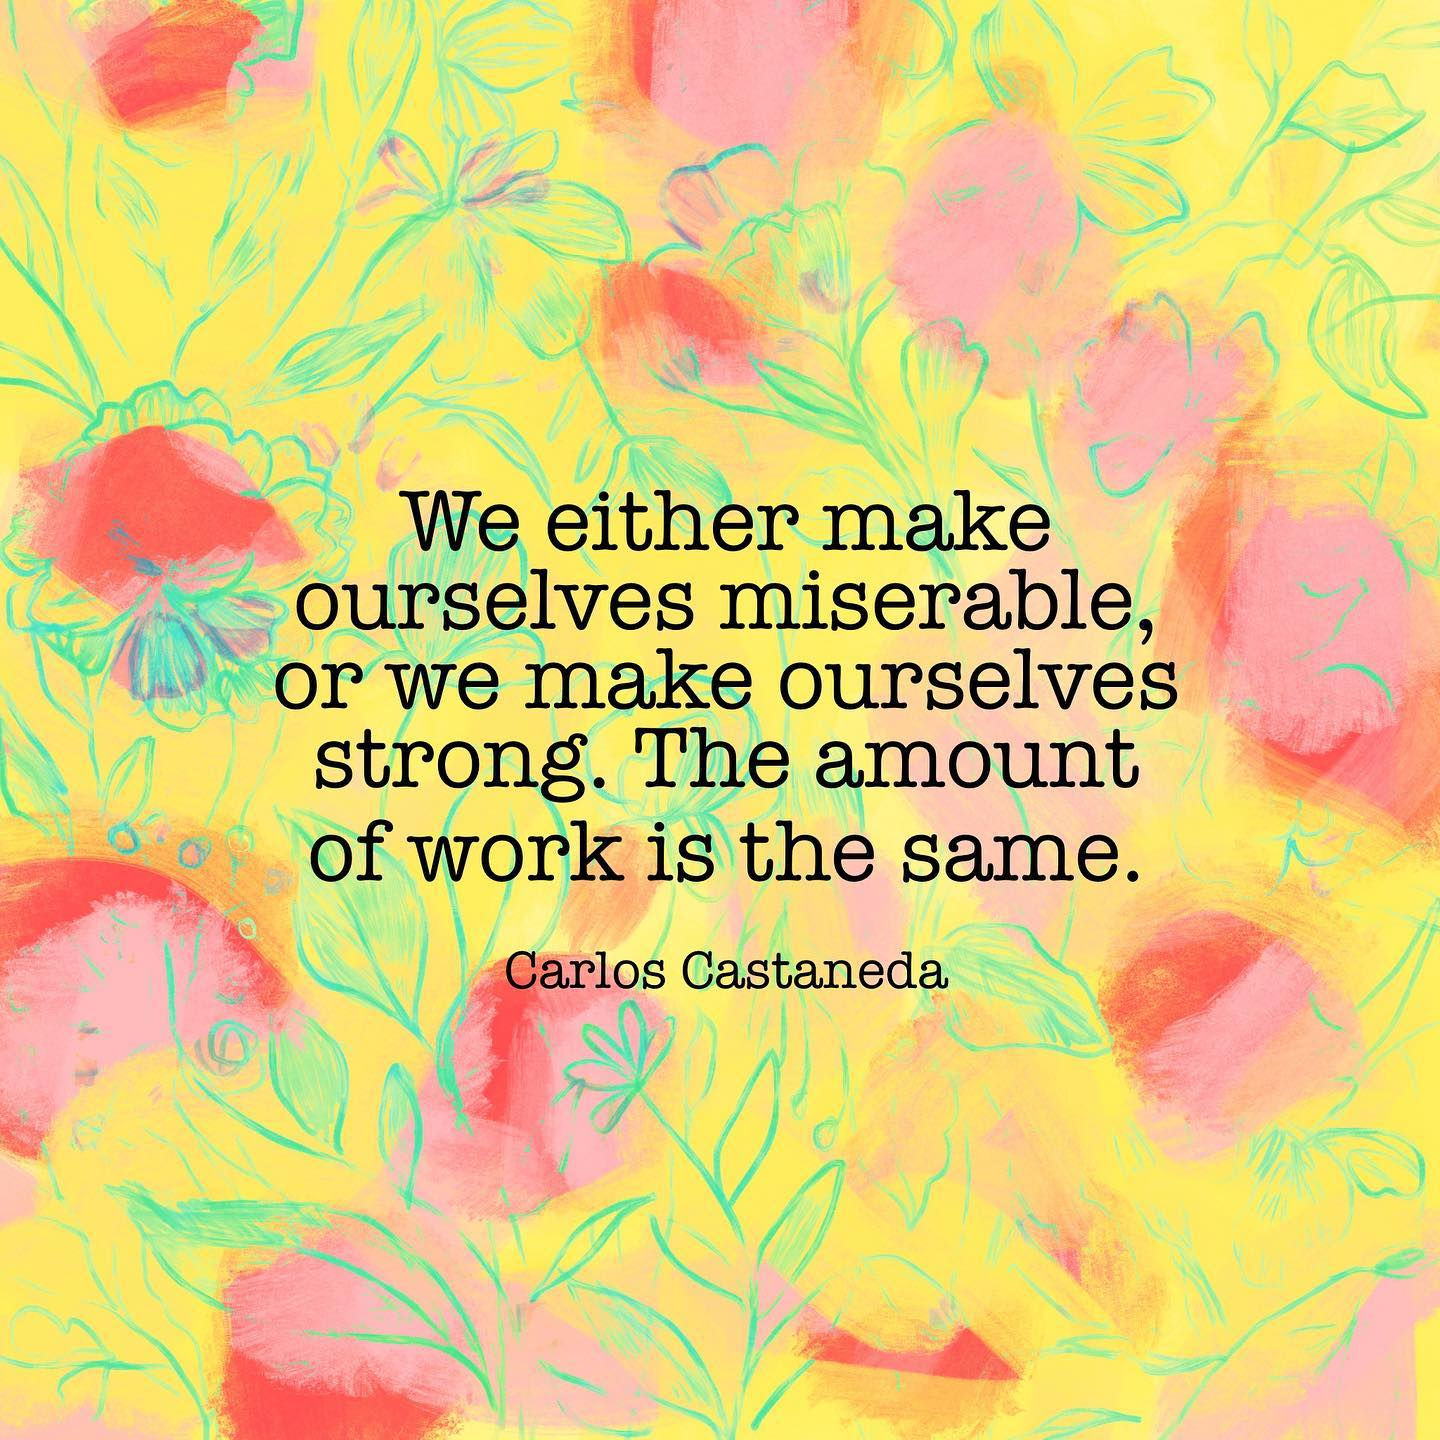 We either make ourselves miserable, or we make ourselves strong. The amount of work is the same.
~ Carlos Castaneda